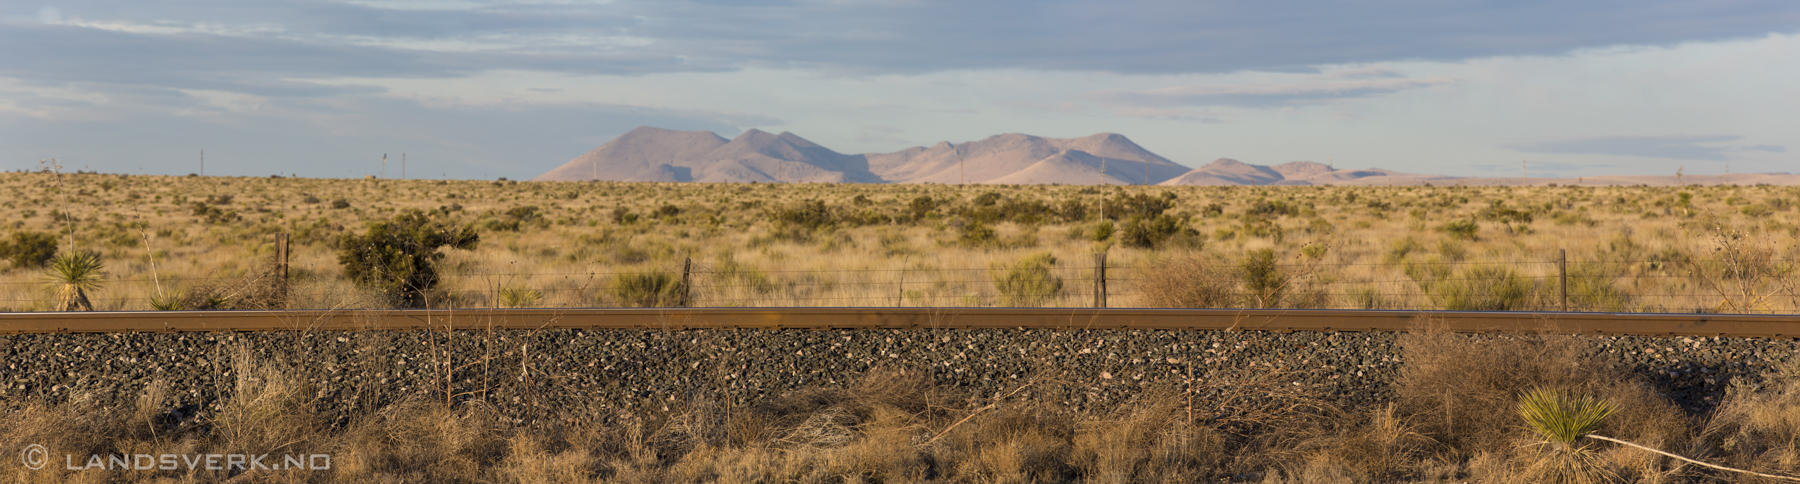 Just outside of Marfa, Texas. 

(Canon EOS 5D Mark III / Canon EF 70-200mm f/2.8 L IS II USM)